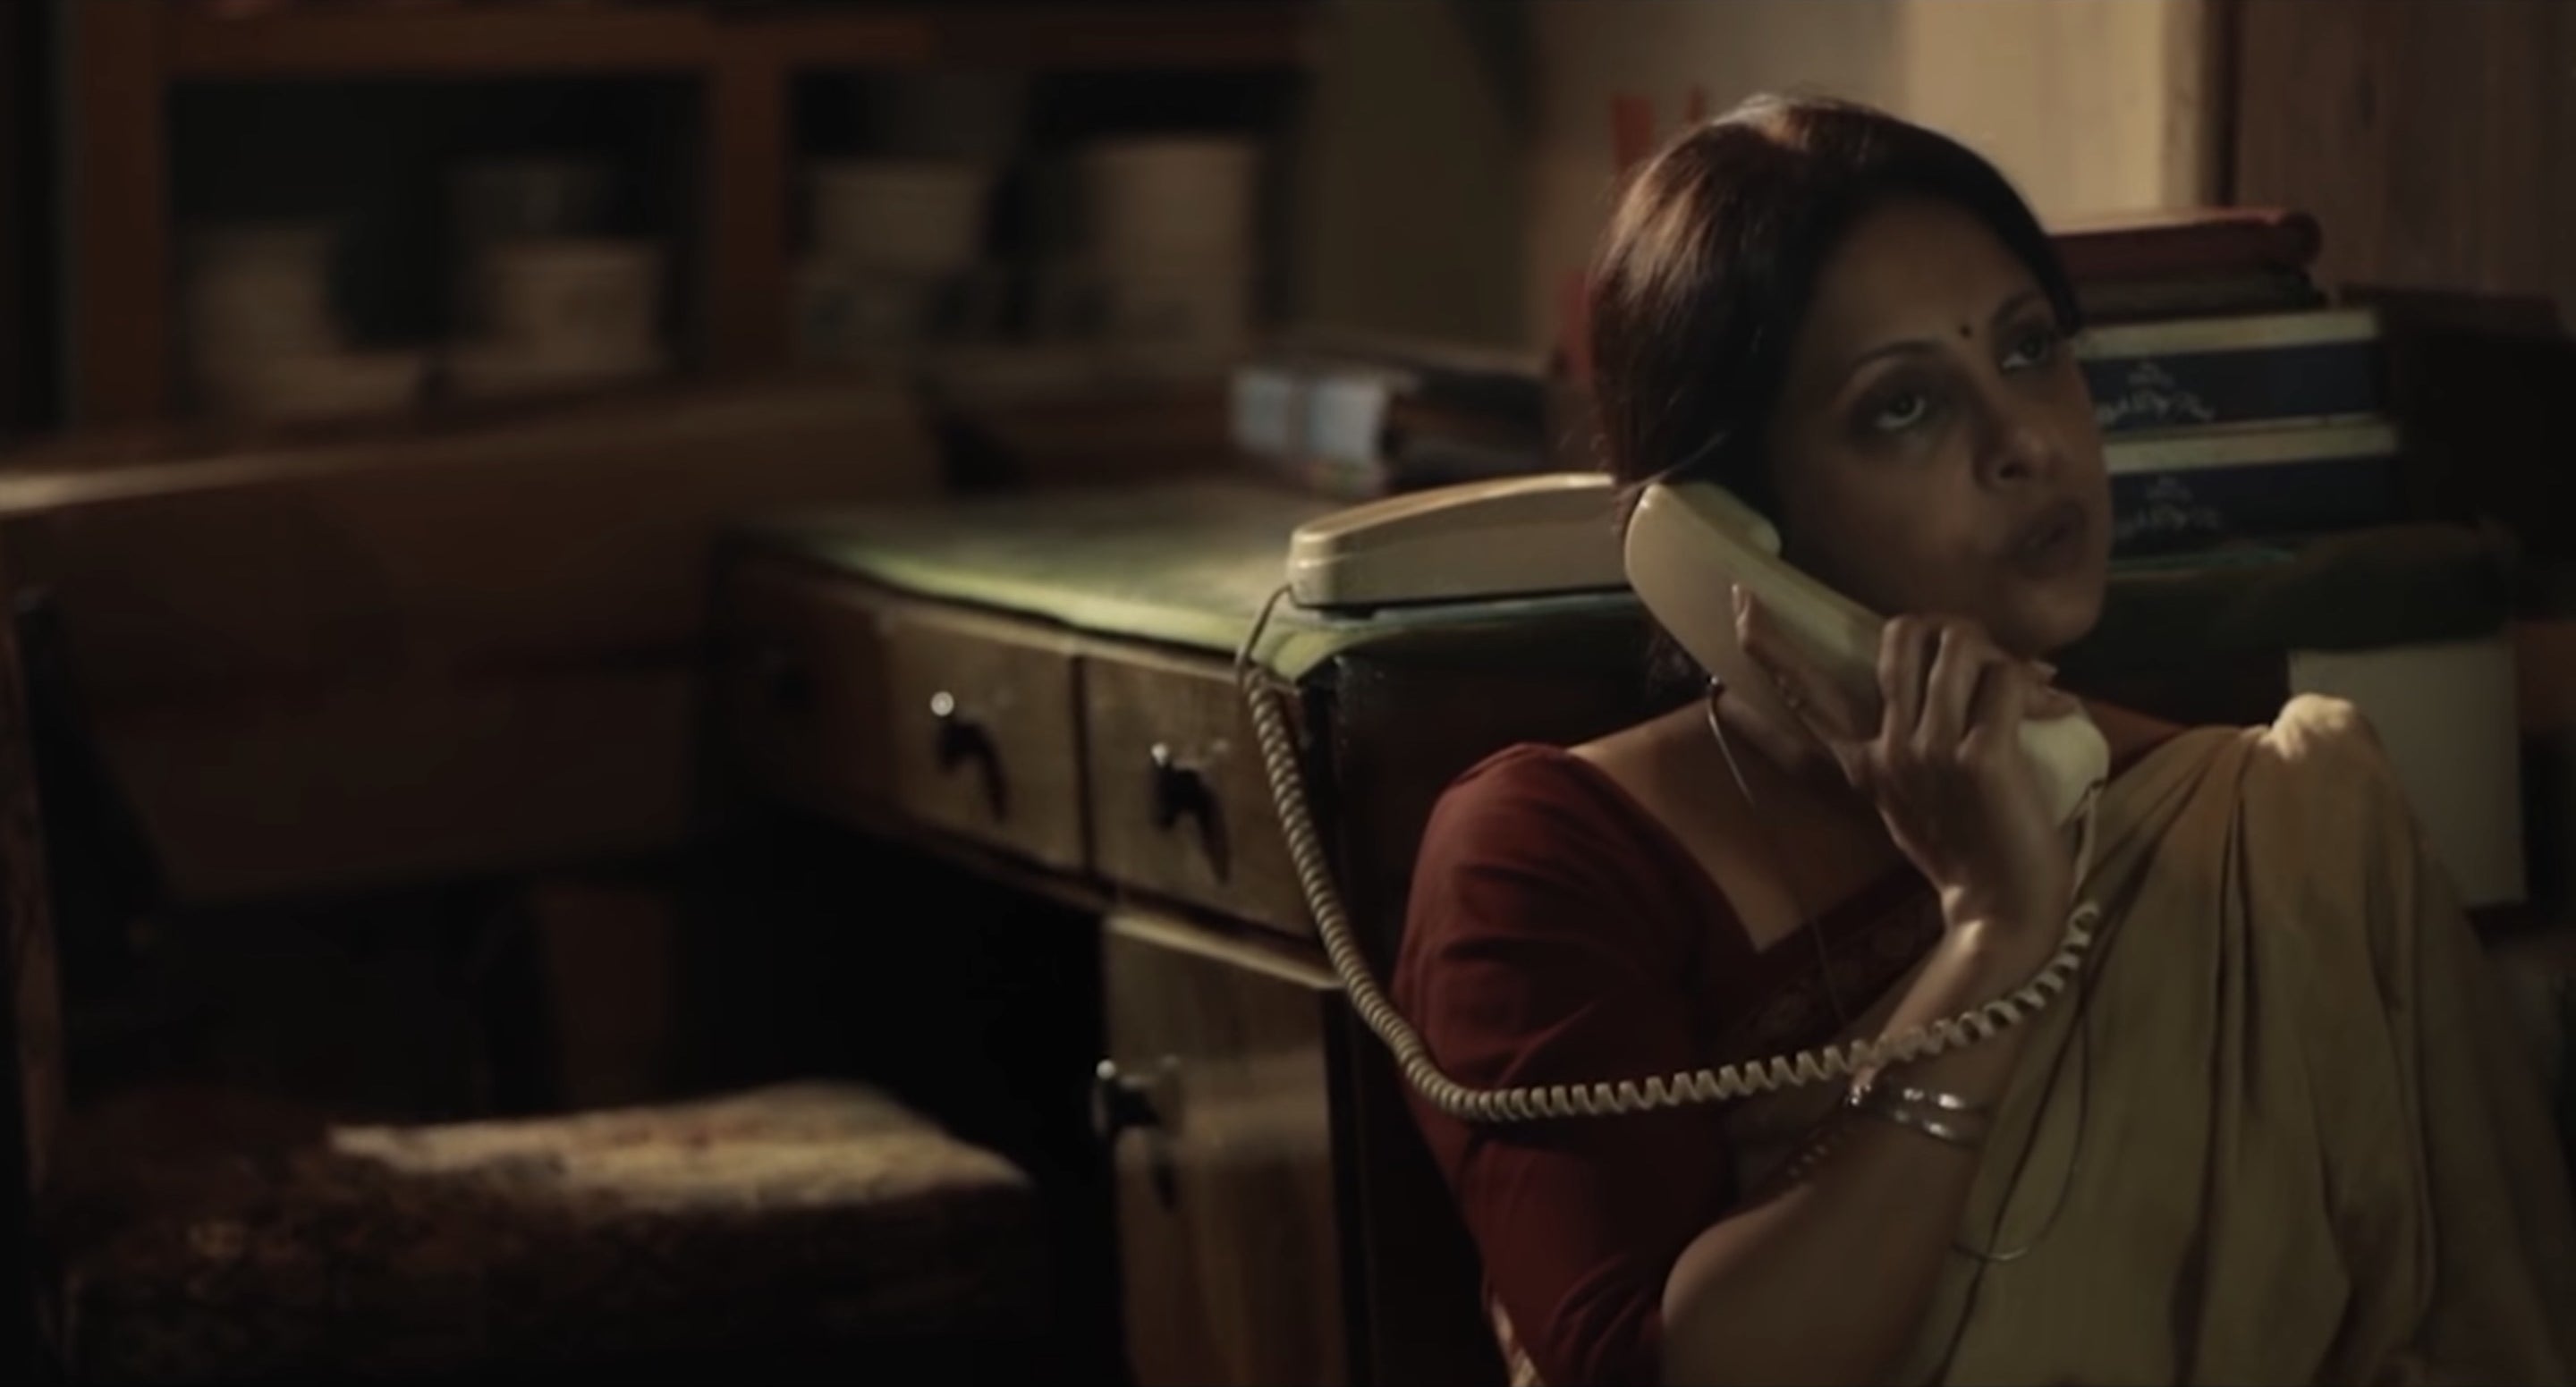 Shefali Shah speaking on a telephone in a still from the film